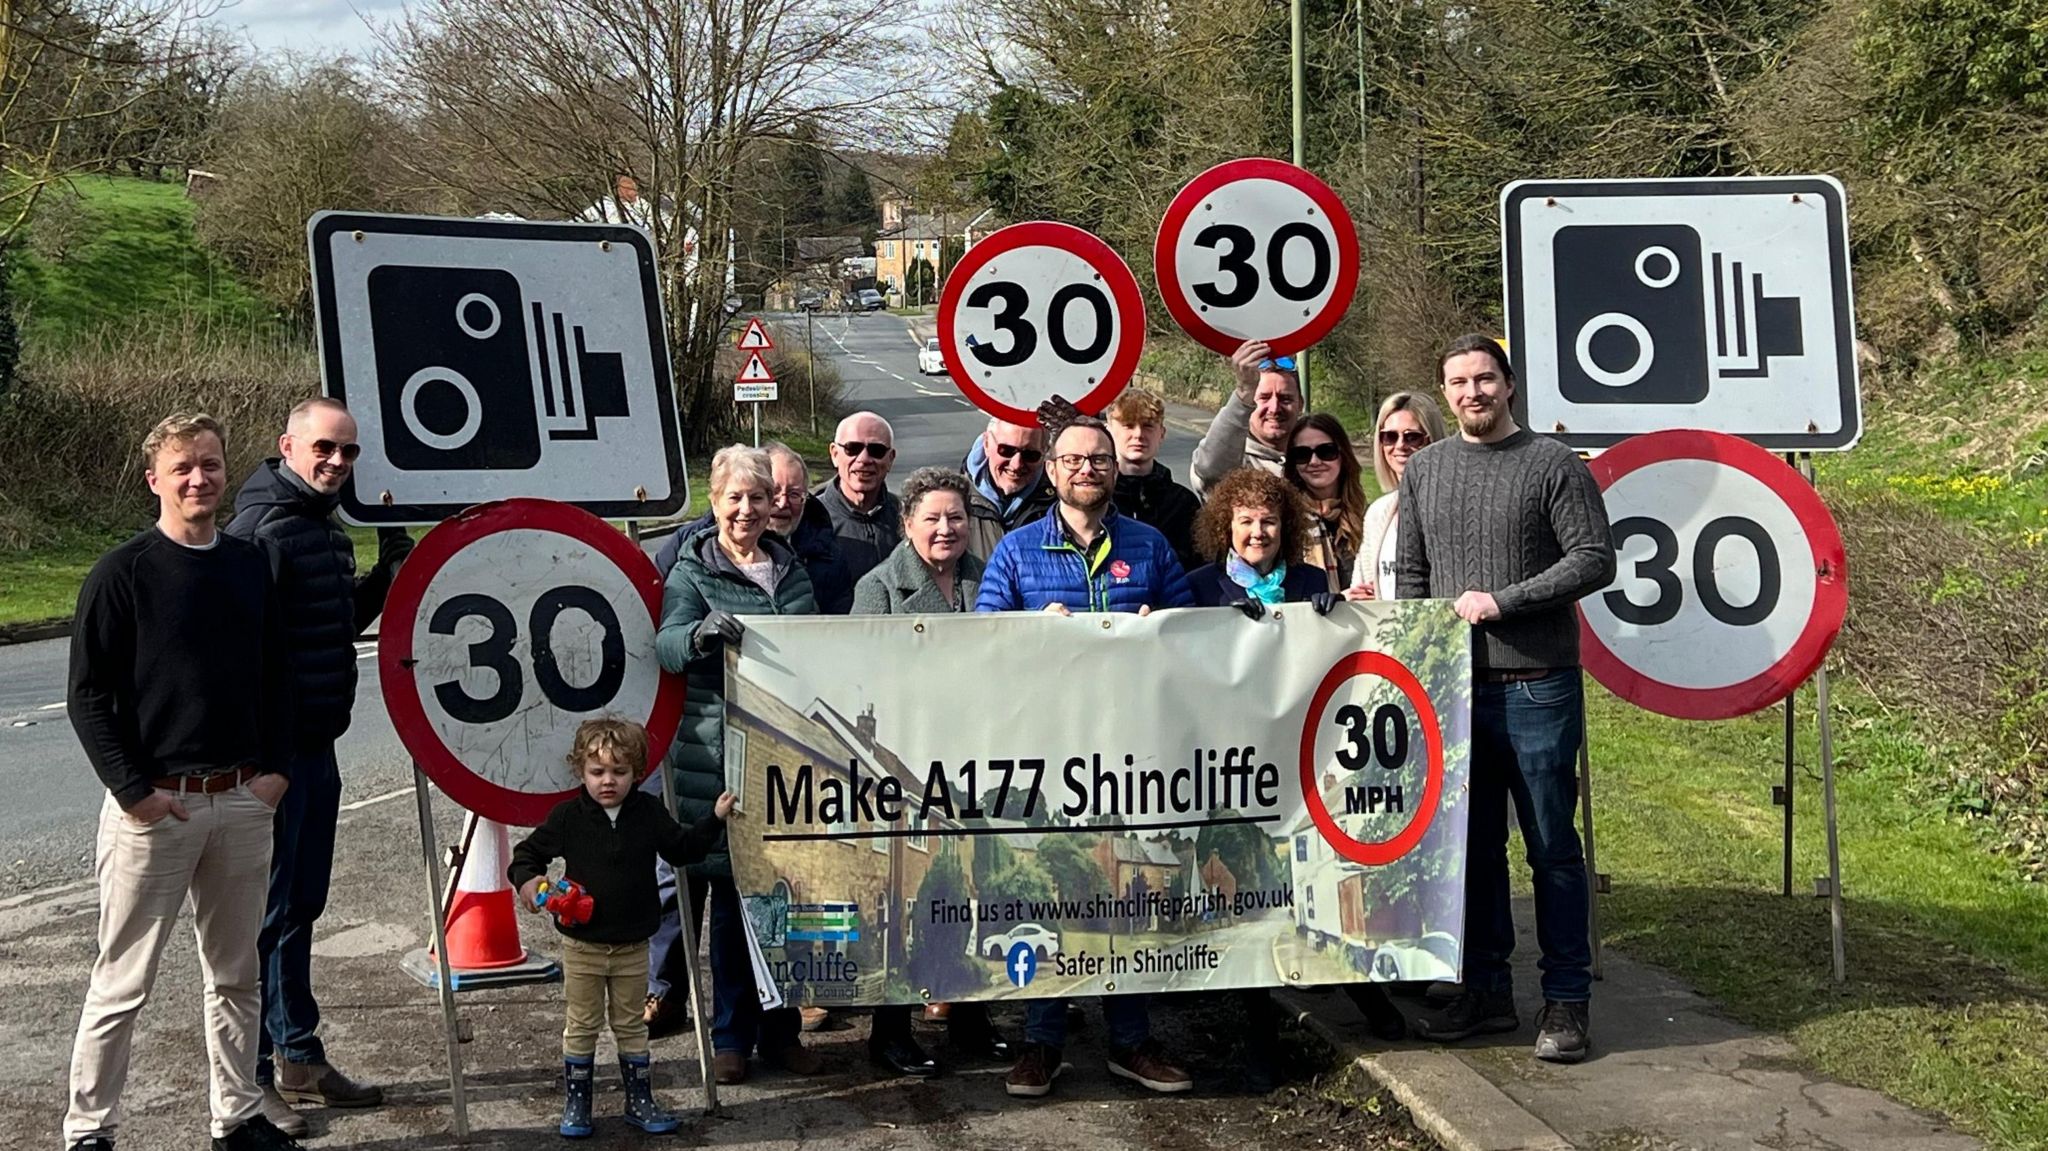 Members of the Safer in Shincliffe campaign group holding  a banner by the road